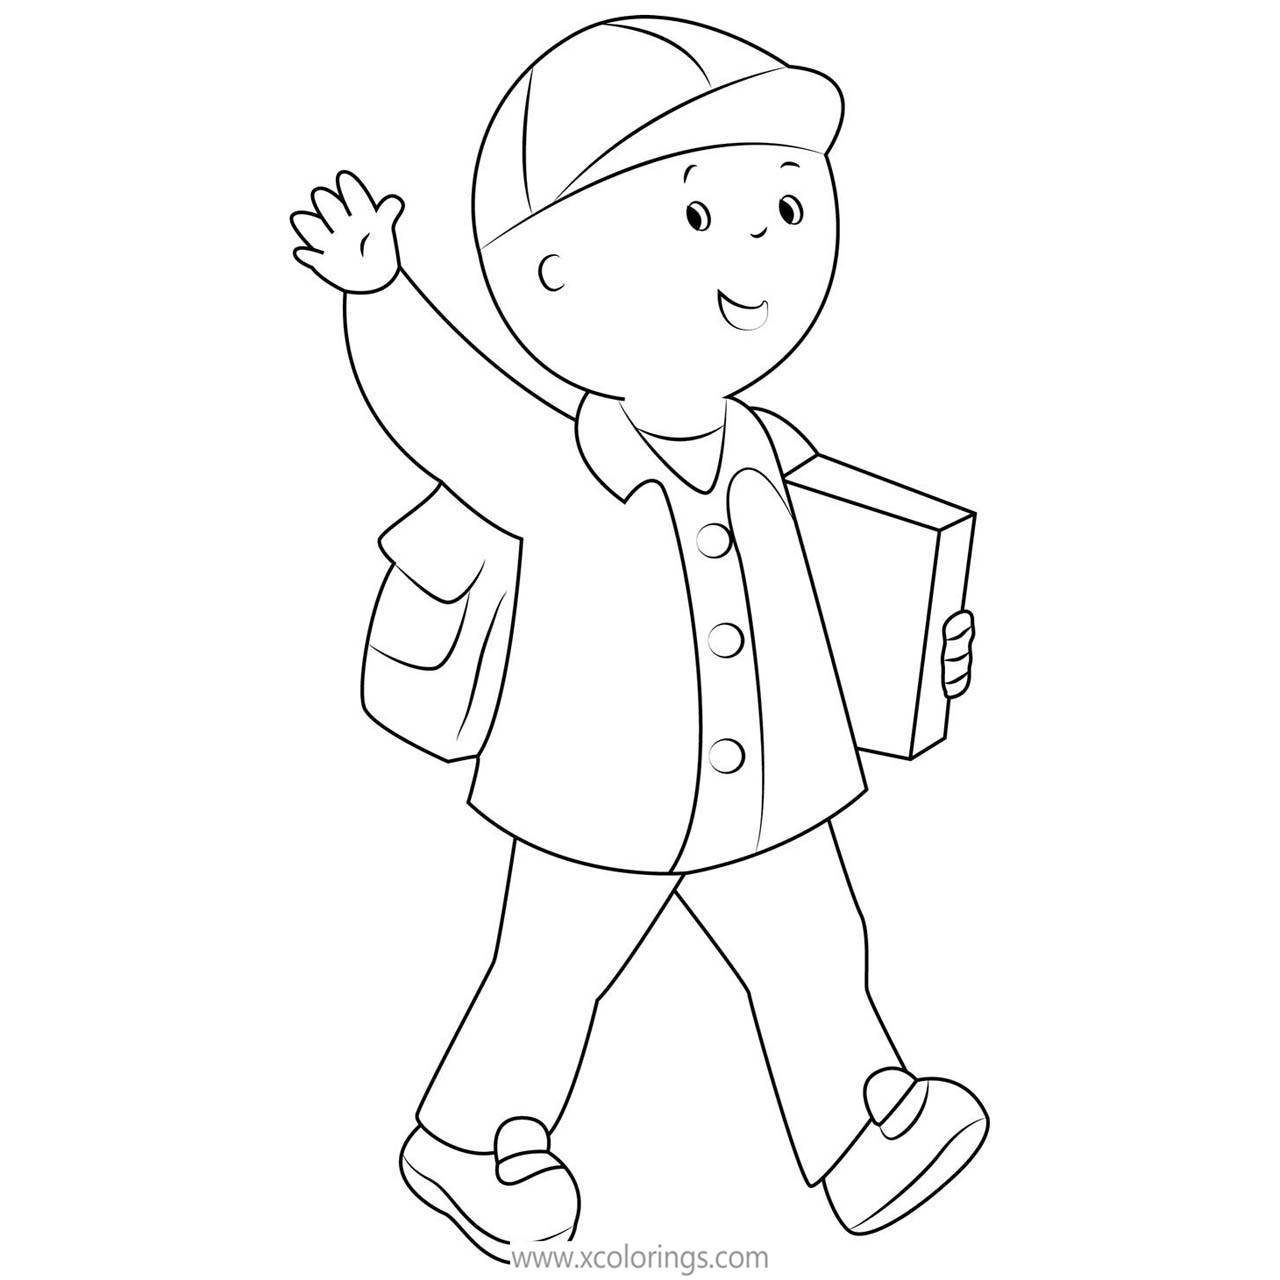 Free Caillou Went to School Coloring Pages printable